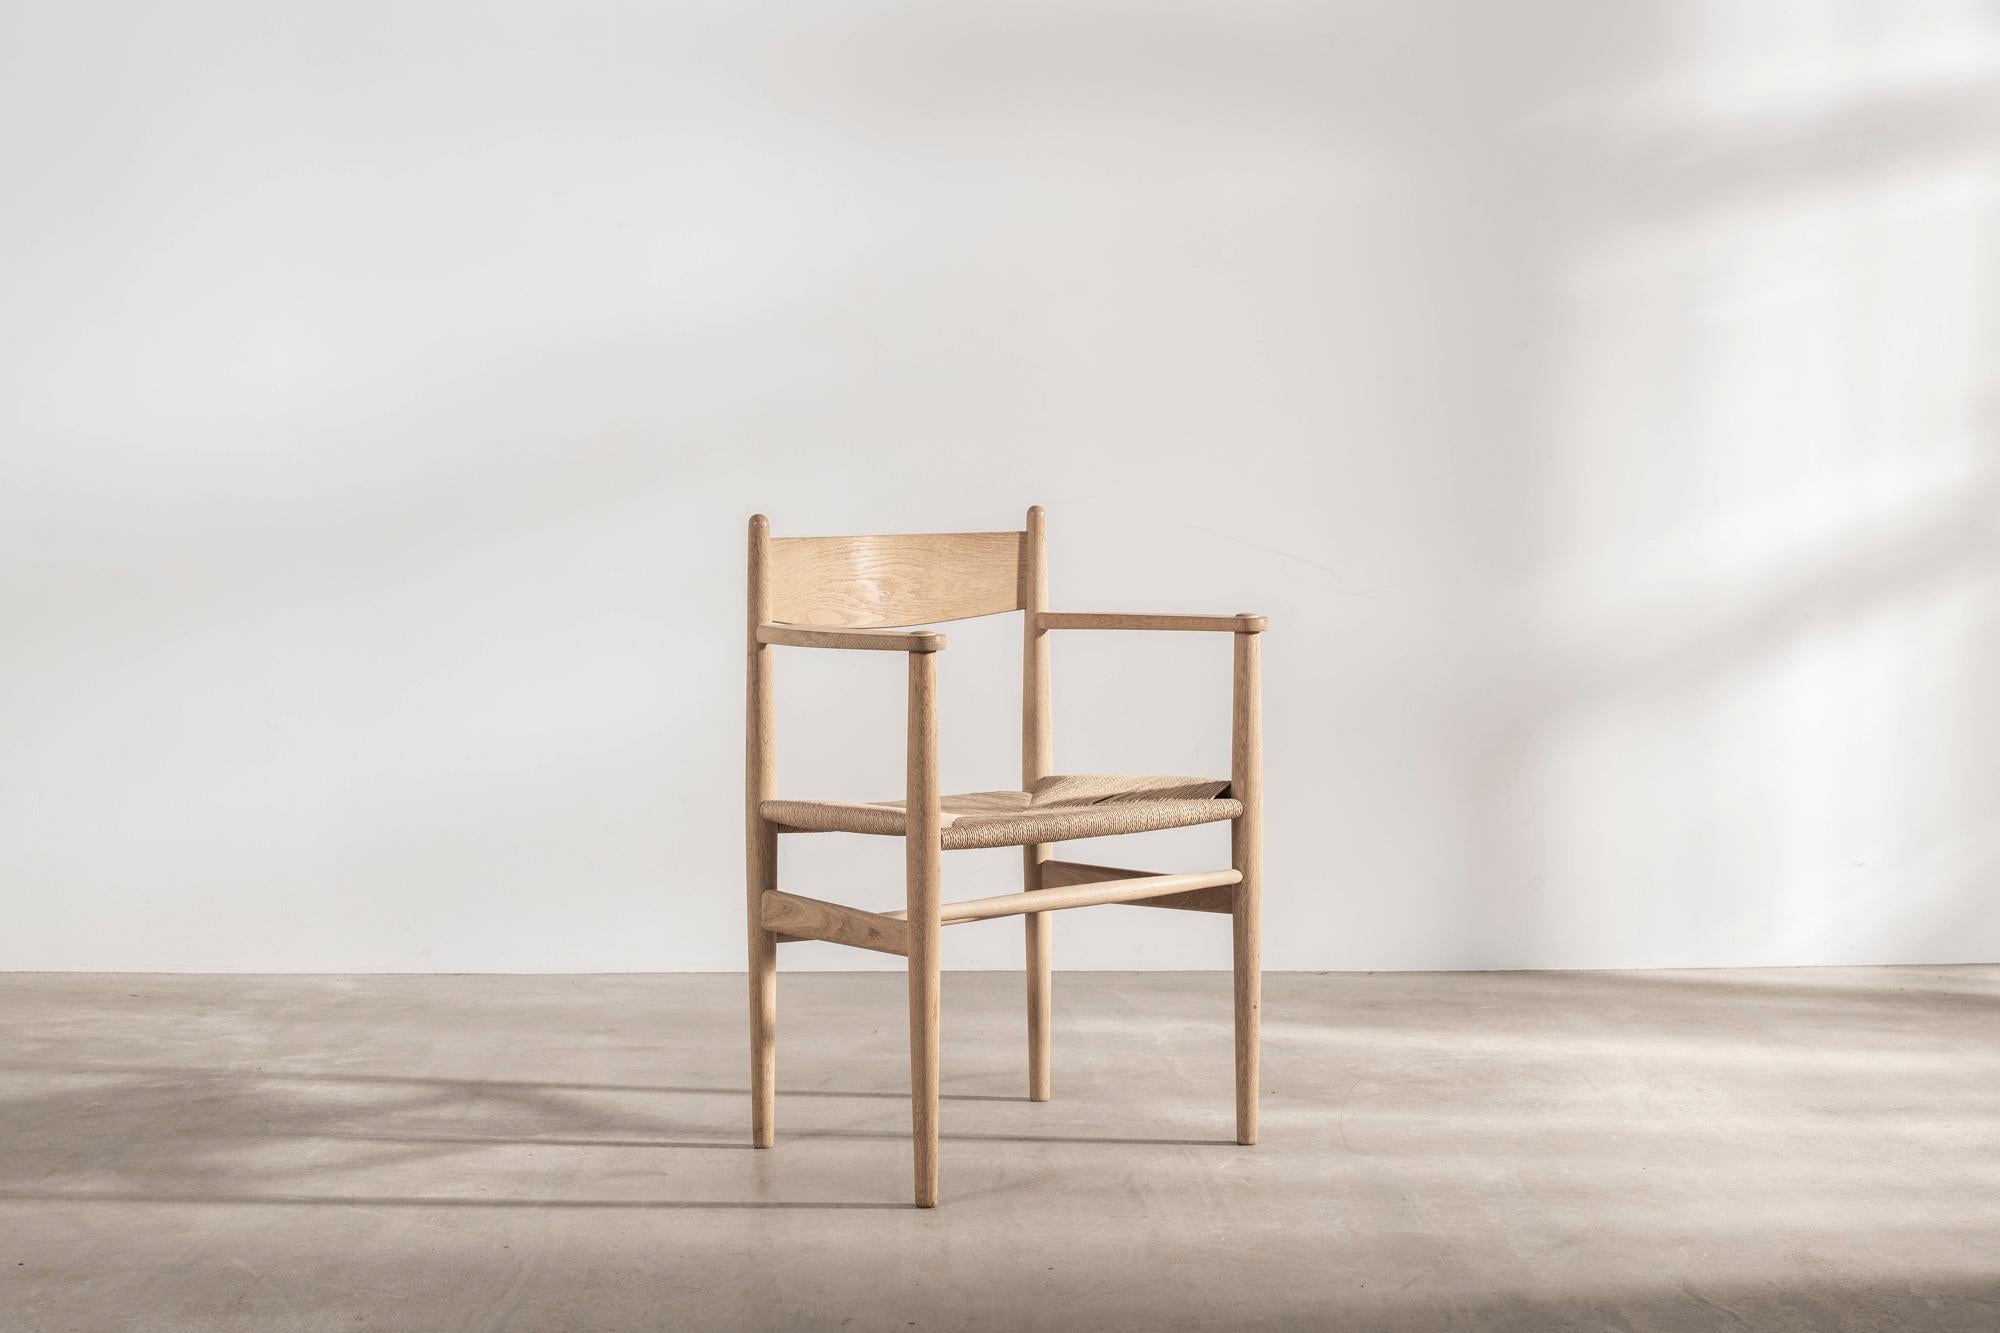 The CH37 dining chair from 1962, designed by Hans J. Wegner, is inspired by the American Shaker furniture principles of simplicity, functionality and craftsmanship. The CH37 also displays many carefully considered details, characteristic of Wegner’s